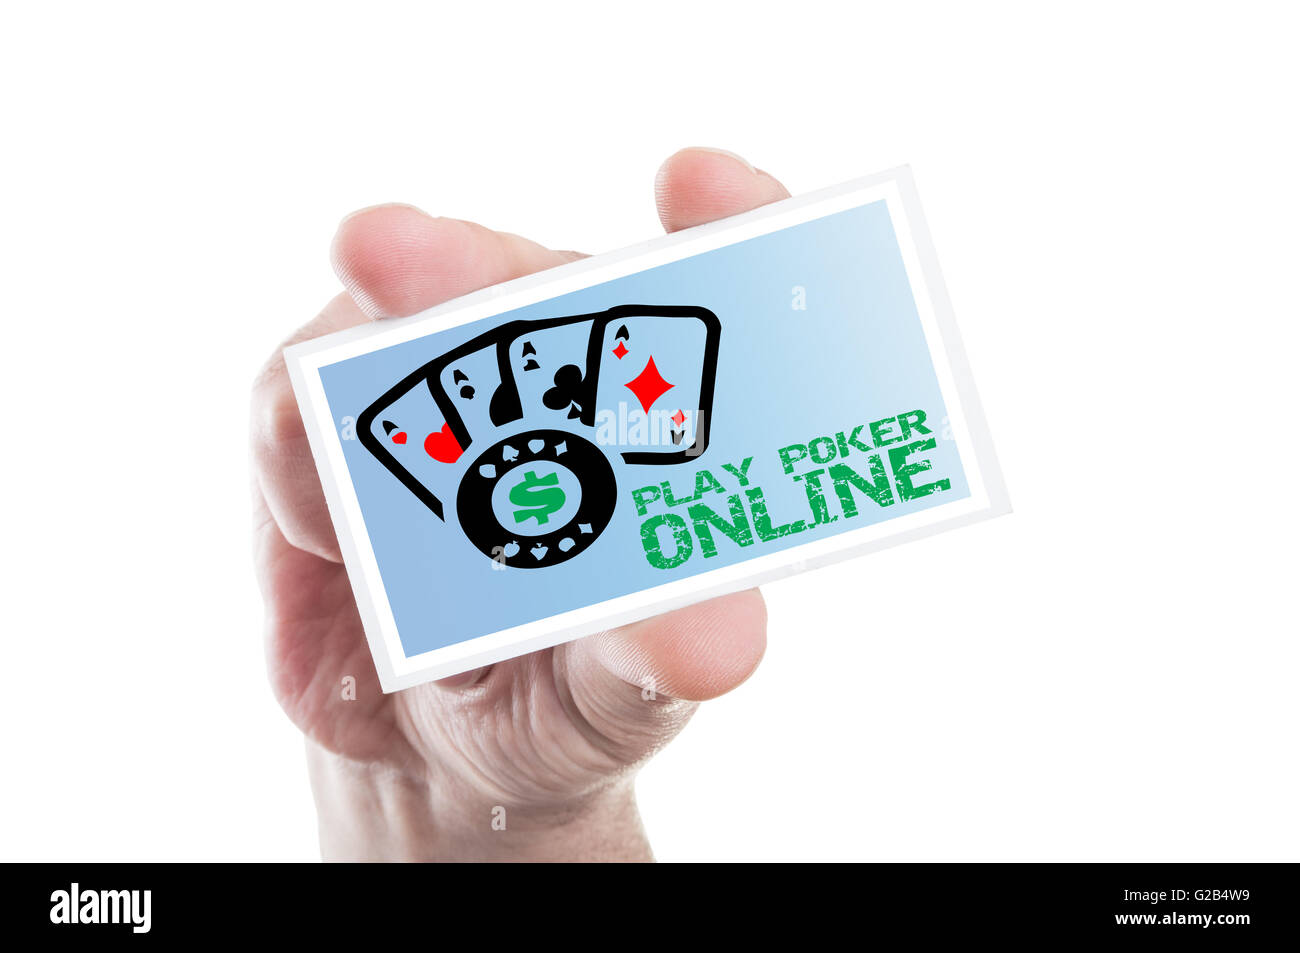 Hand holding play poker online card with four aces as internet gambling website concept Stock Photo